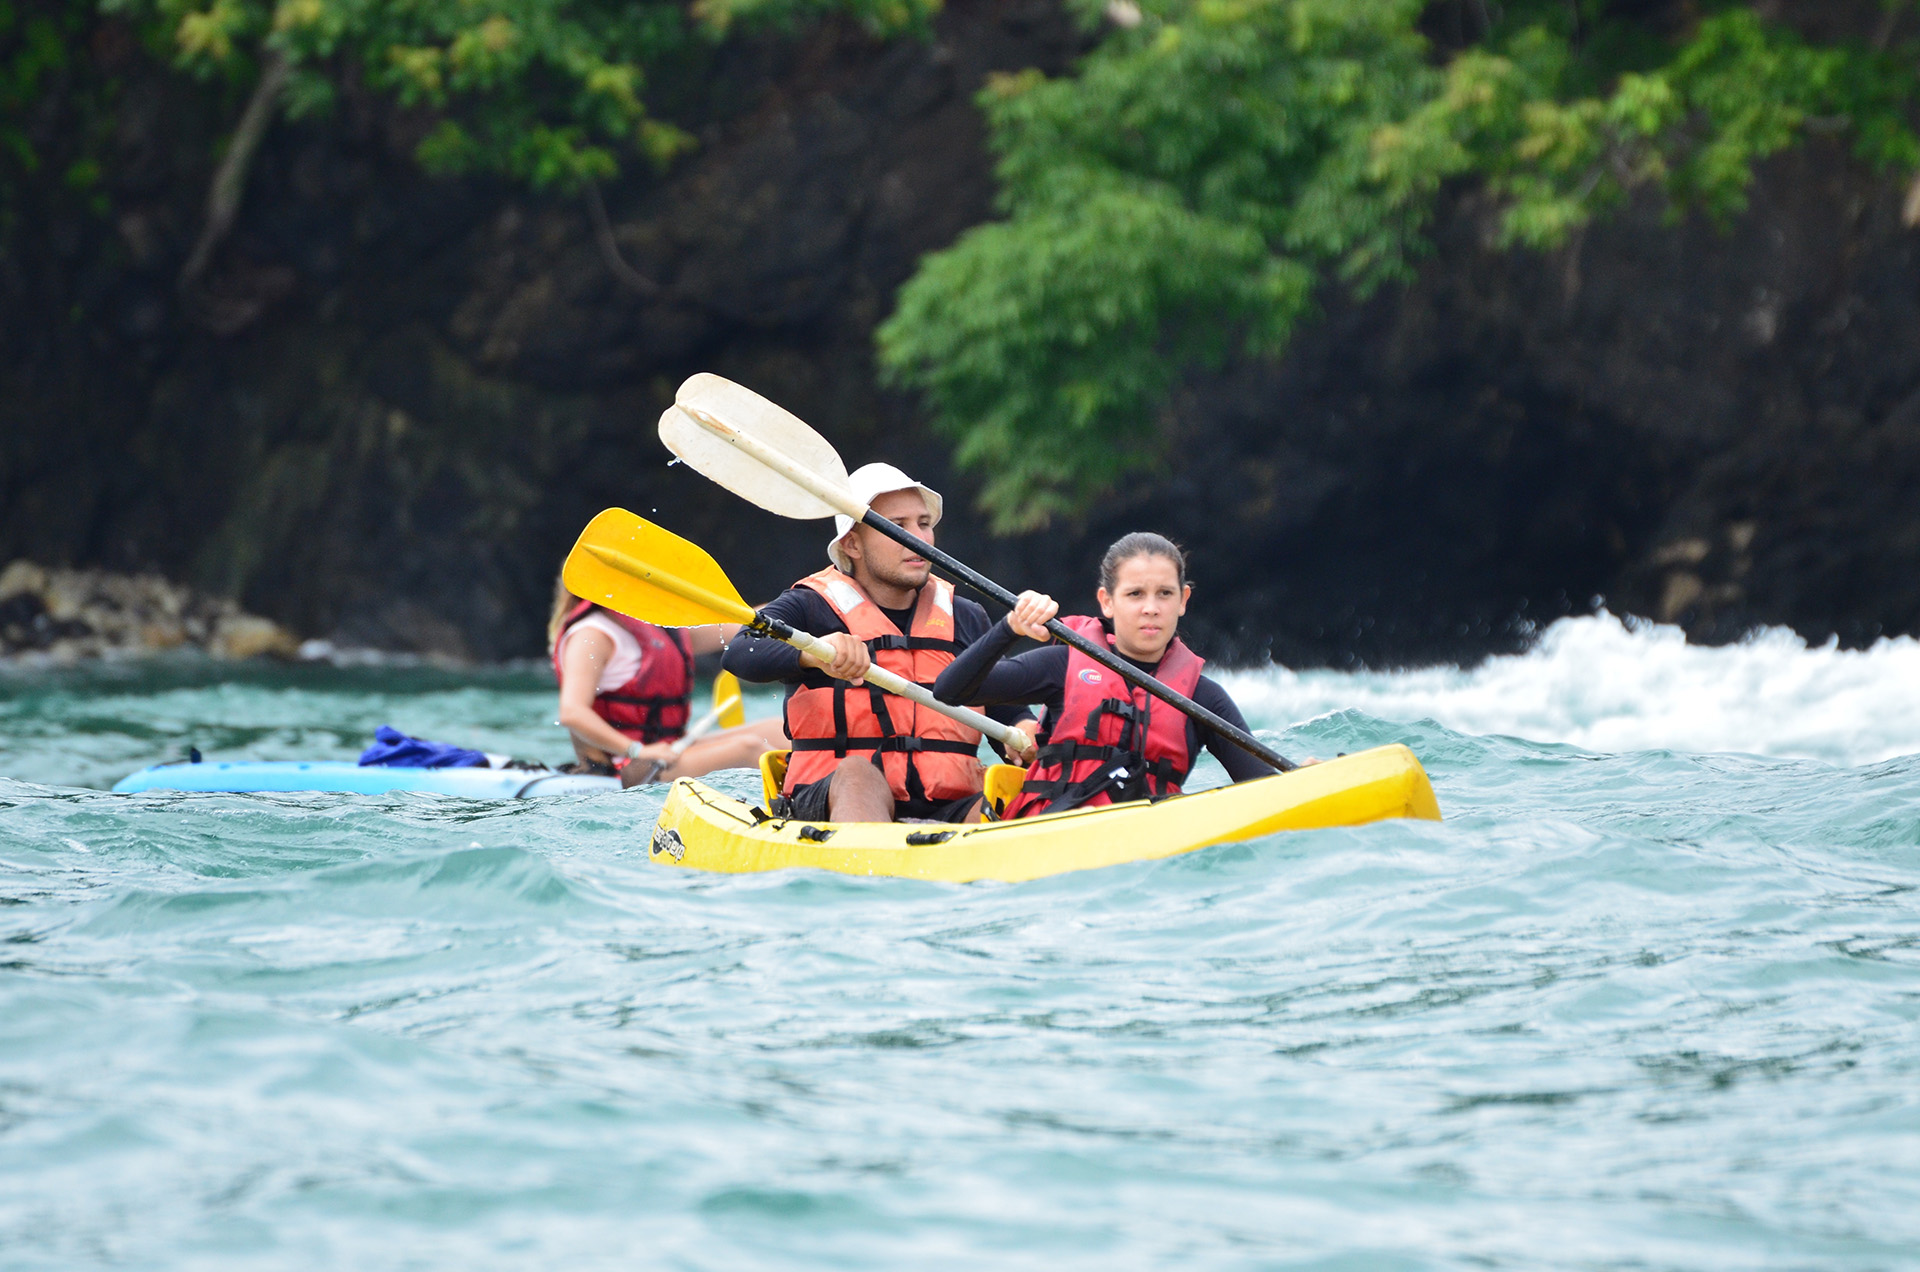 Adventure seekers paddling through the waves in a tandem kayak, exploring the natural beauty along a rocky coastline in Manuel Antonio, Costa Rica.